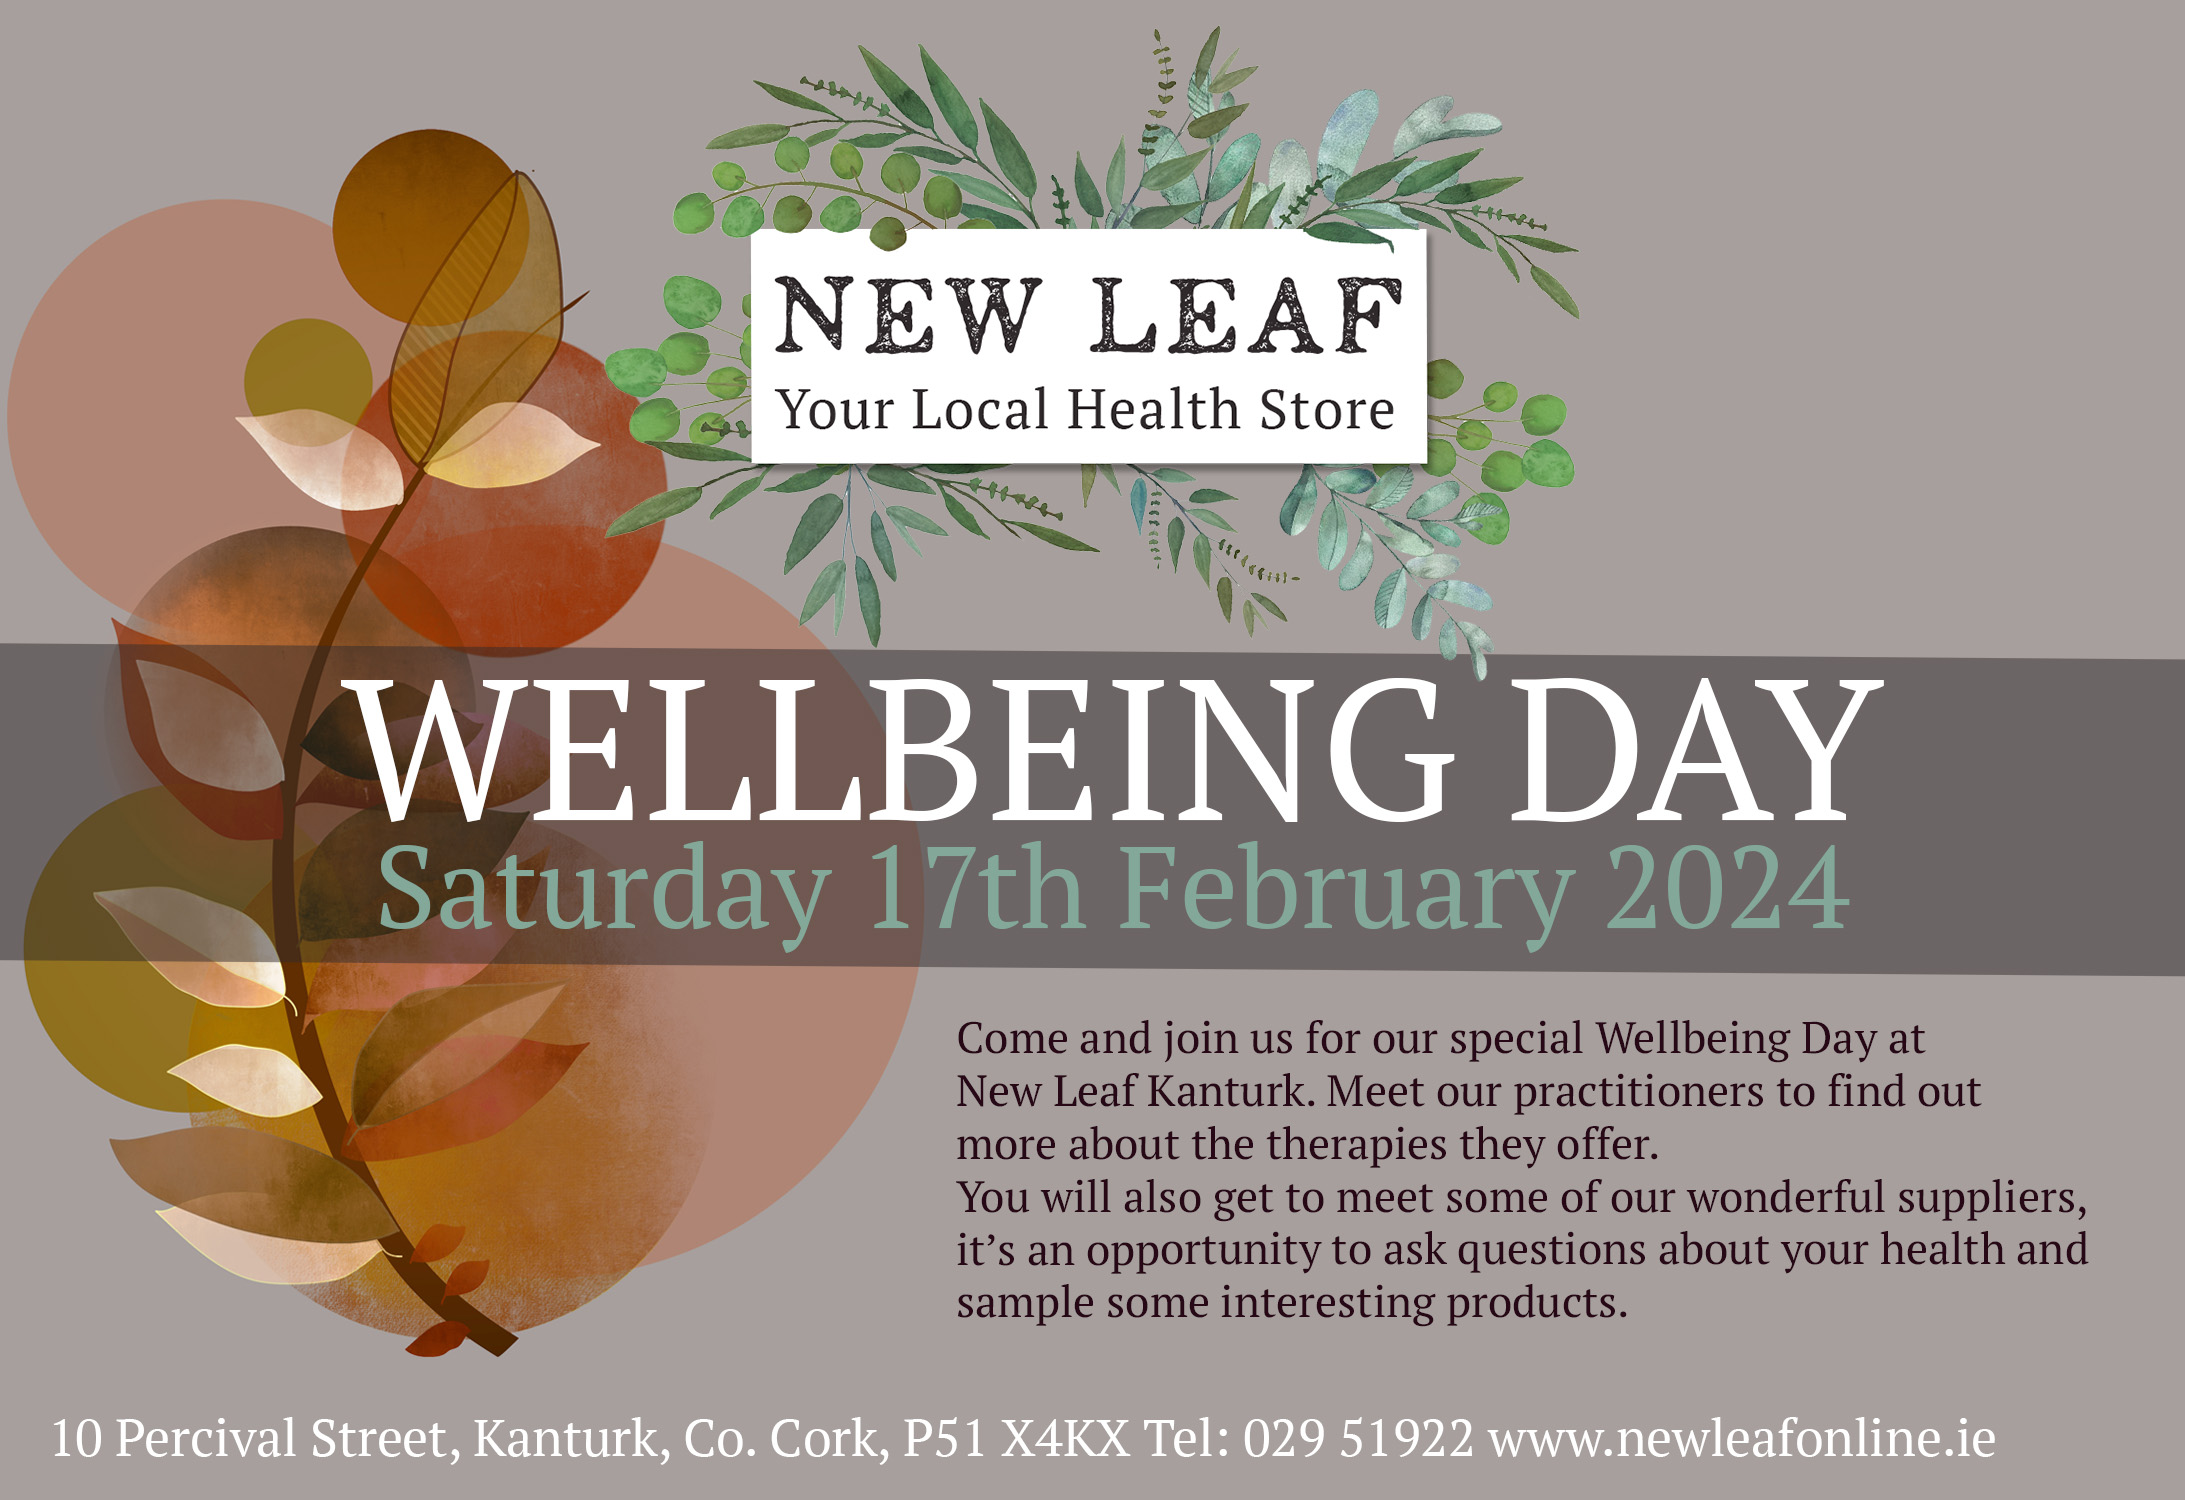 What’s happening at the Wellbeing Day on 17th Feb